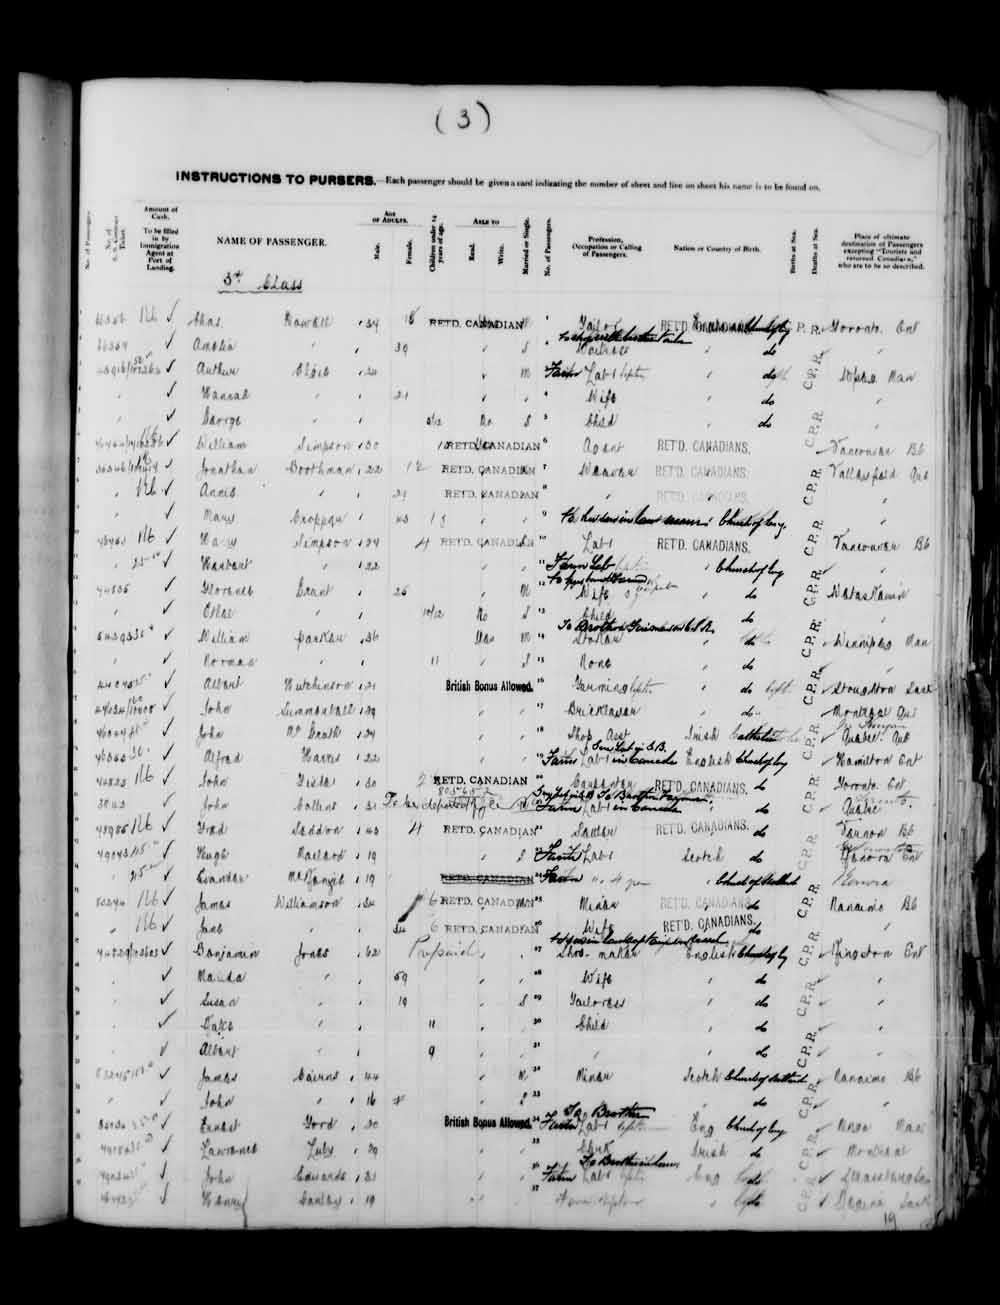 Digitized page of Quebec Passenger Lists for Image No.: e003591574